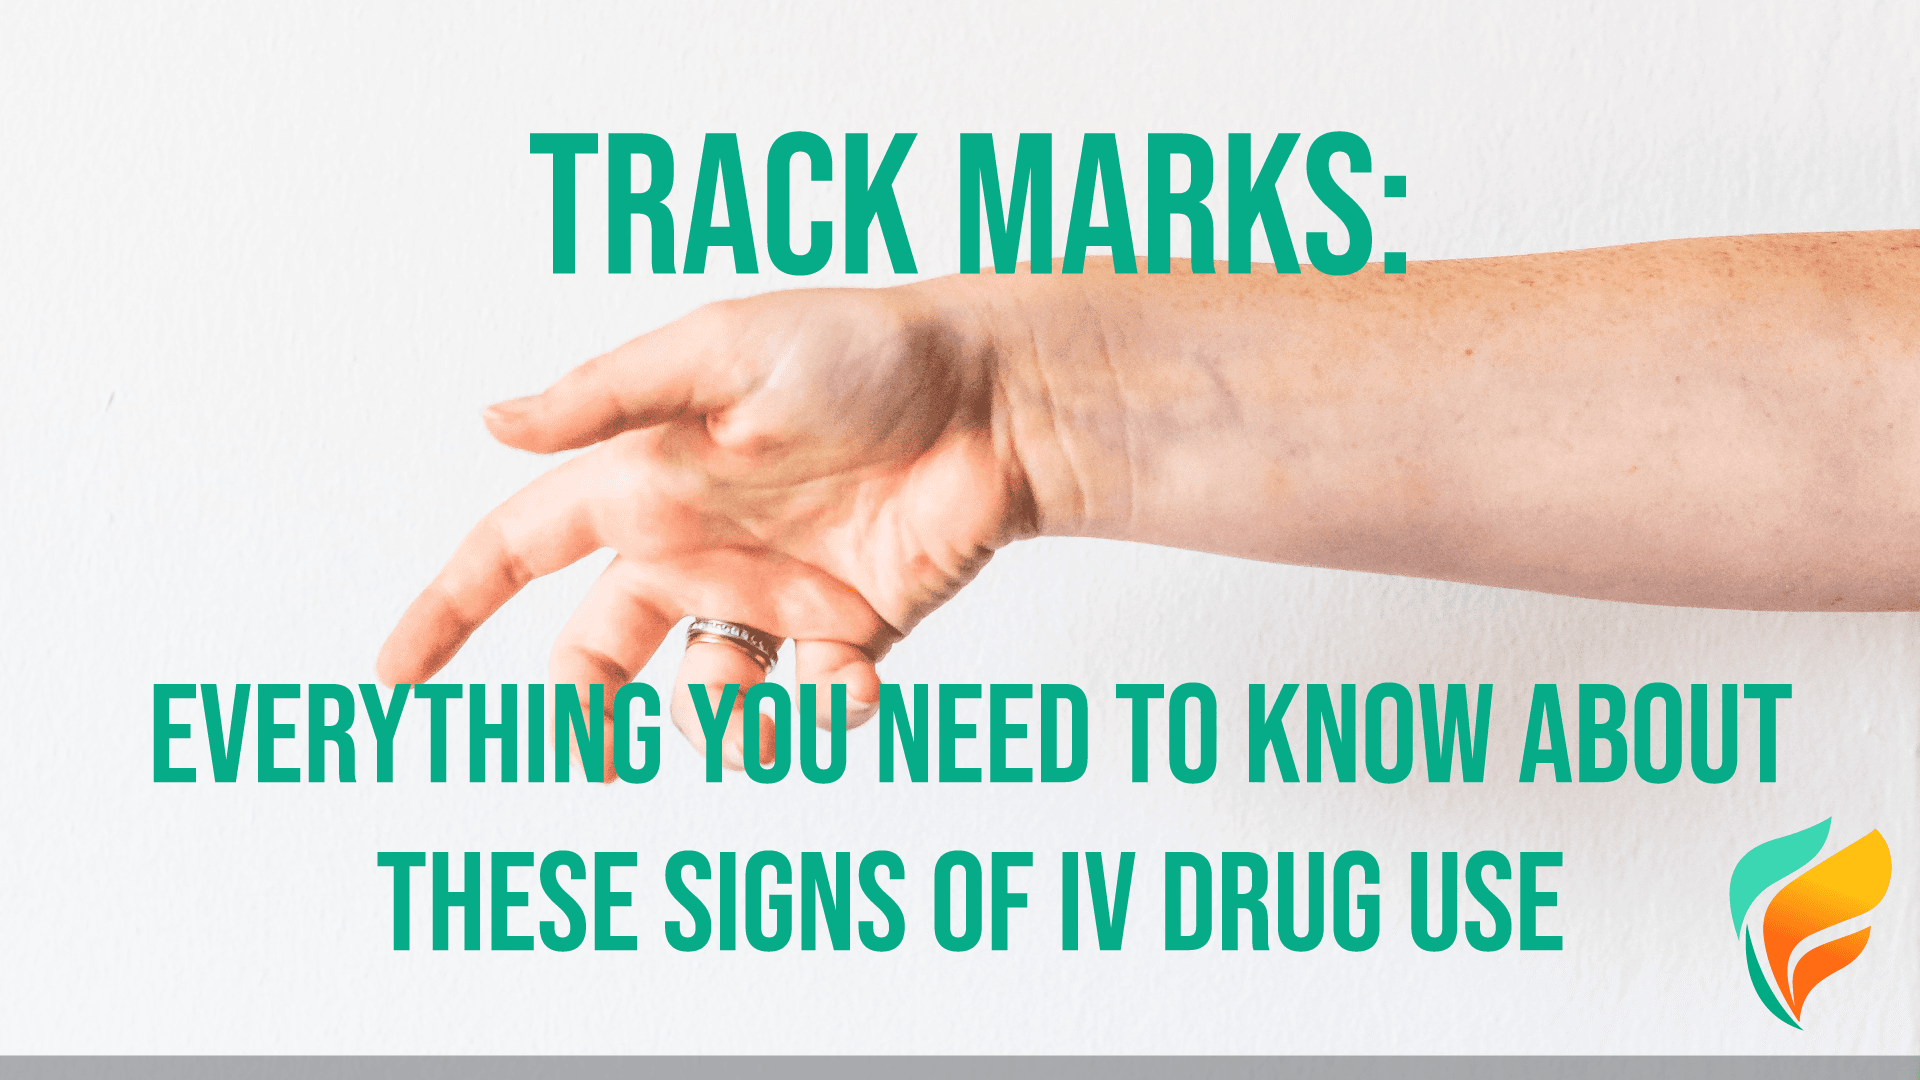 What are Track Marks?